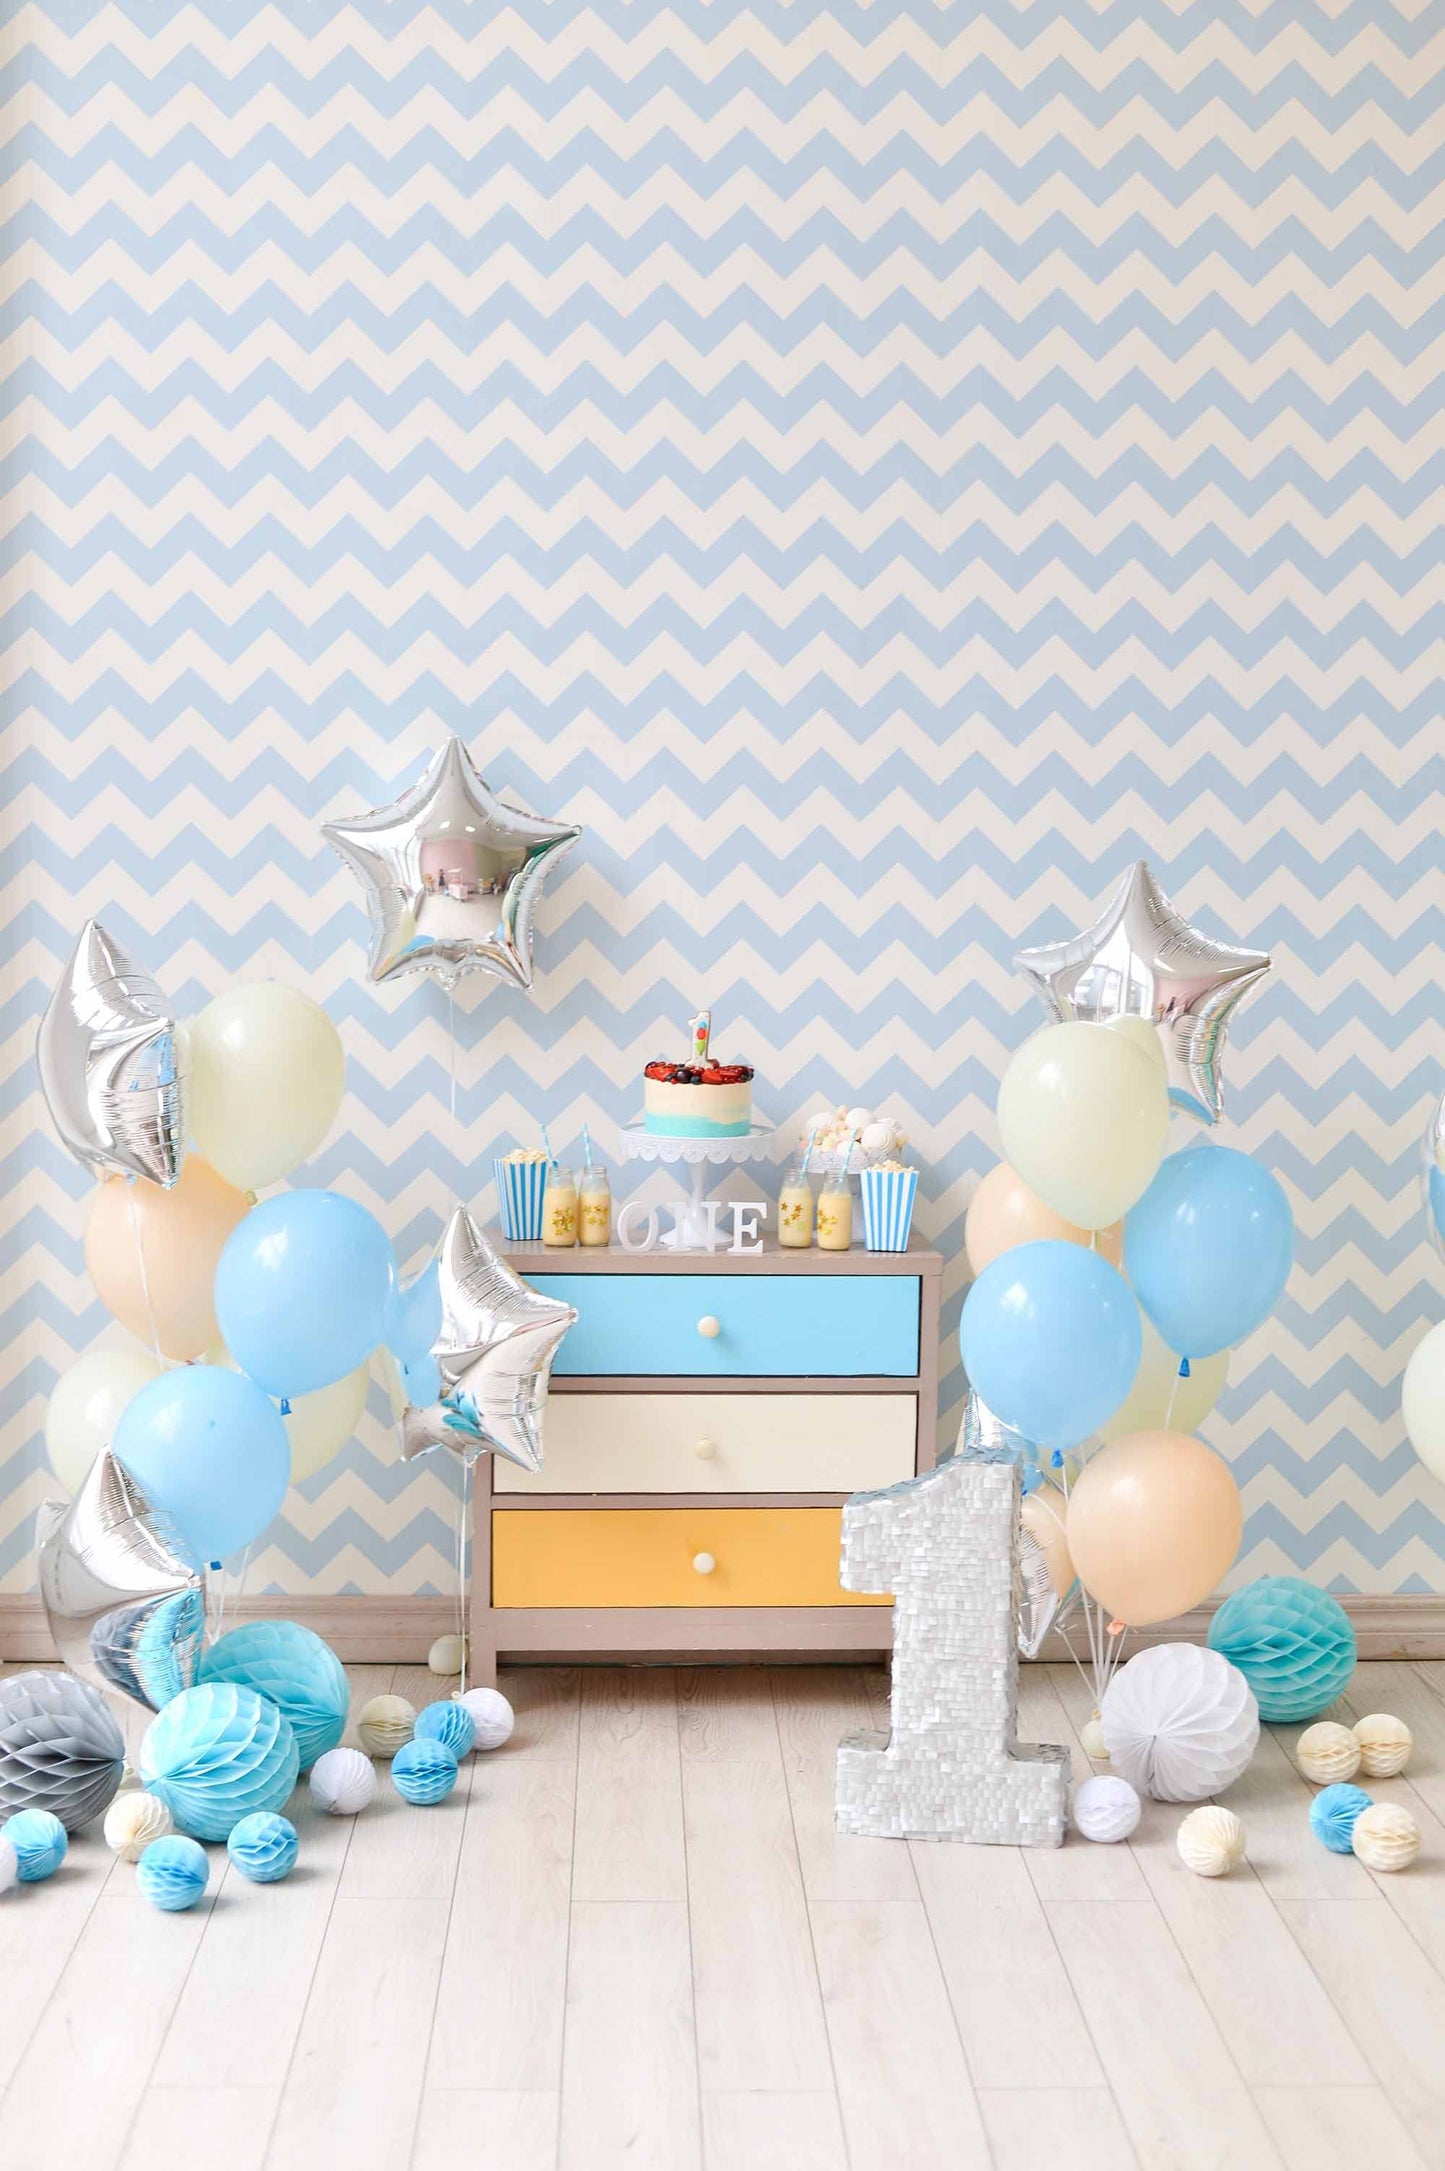 Blue Chevron Wall With Silver Star And Nature Wood Floor For One Birthday Backdrop Shopbackdrop